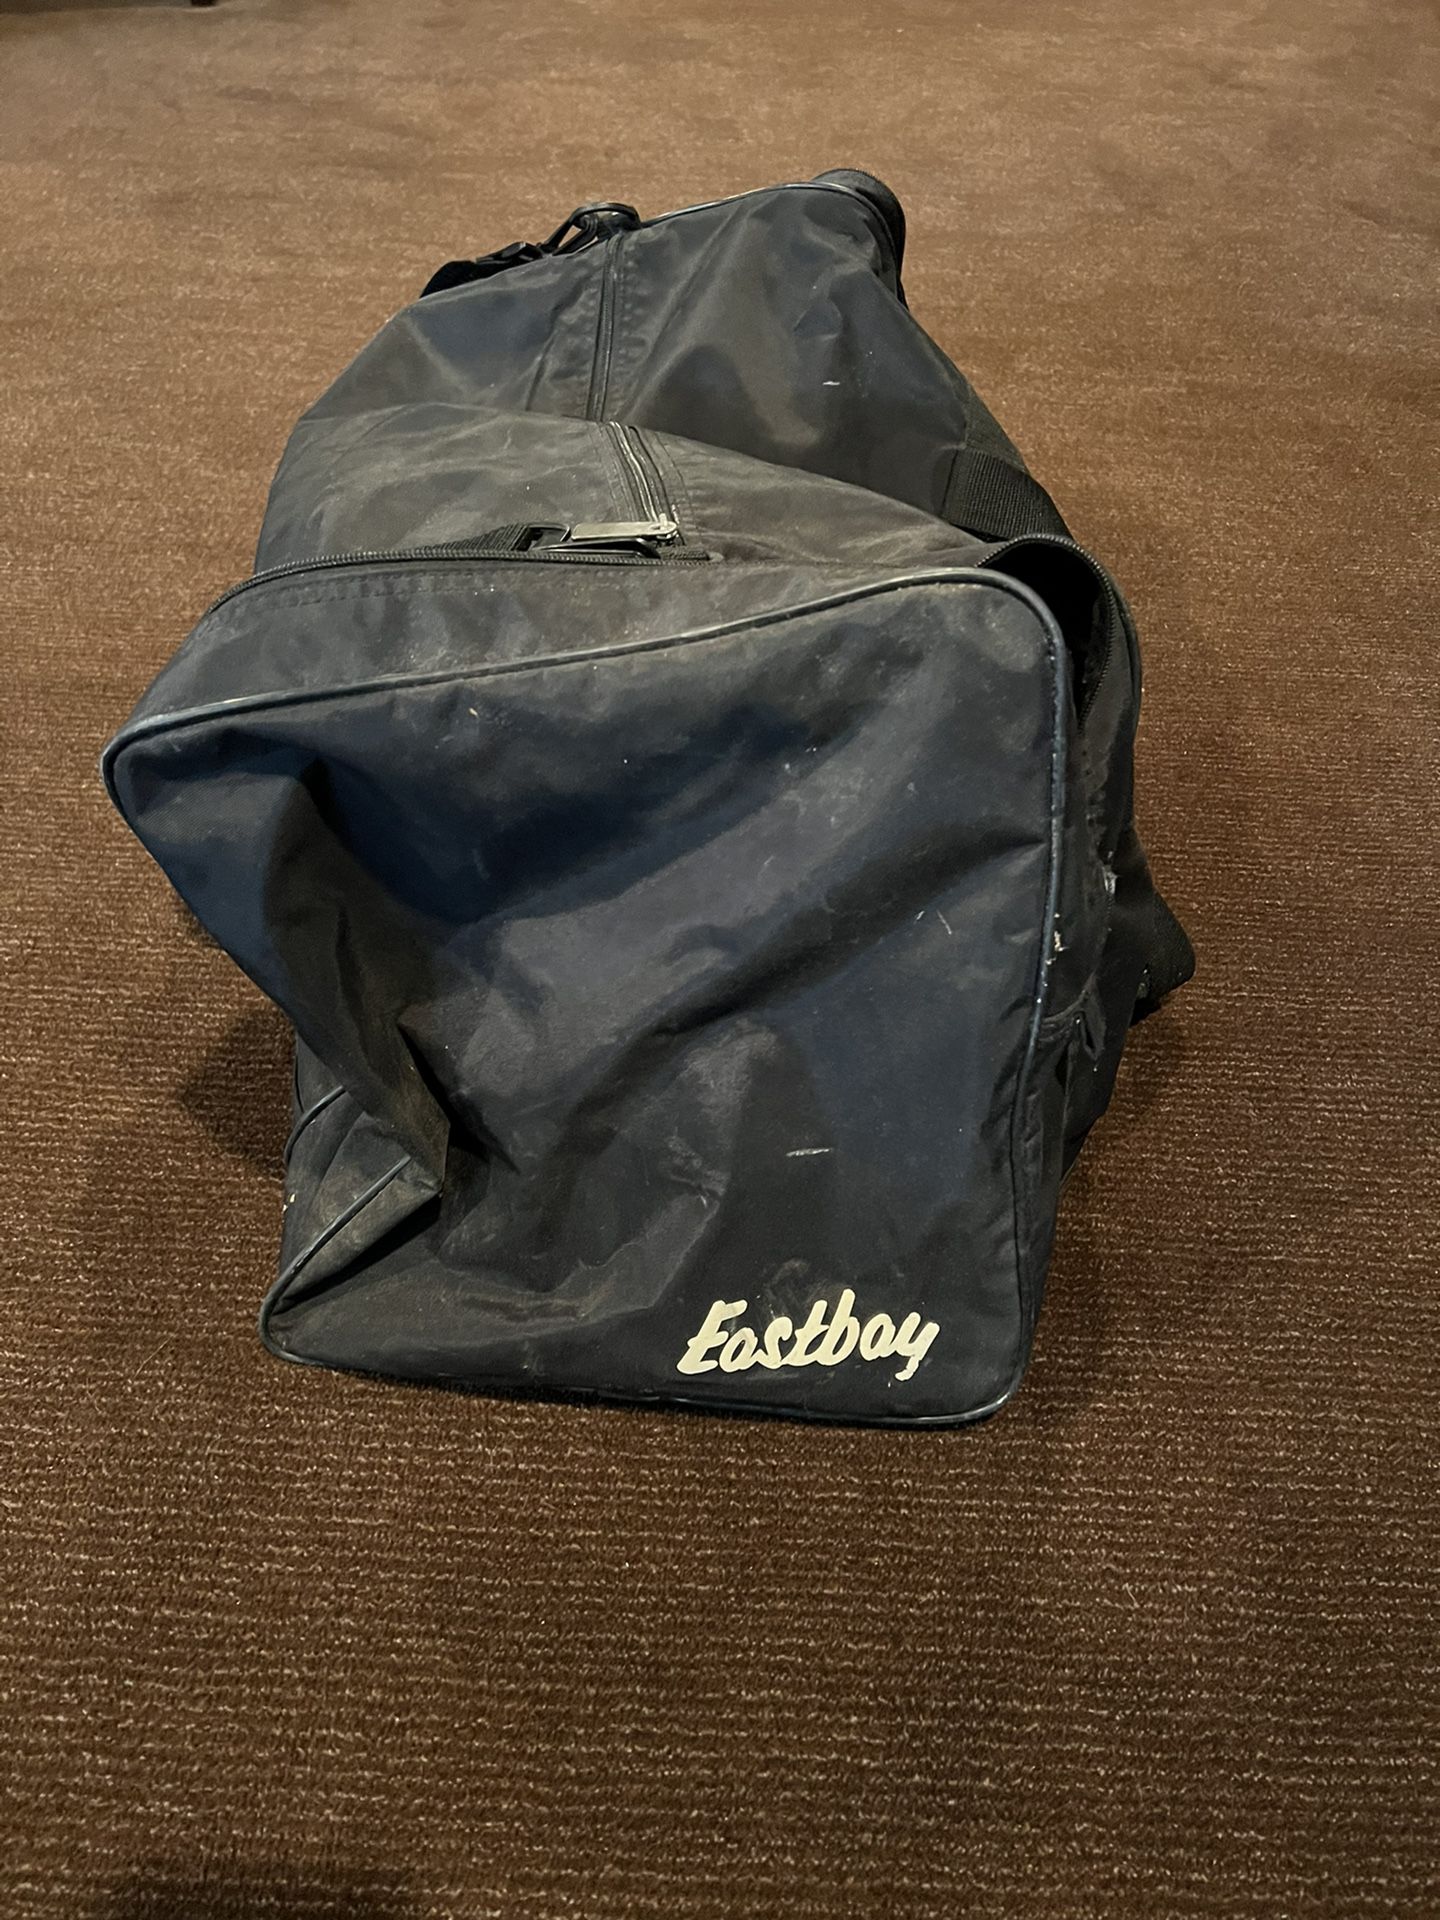 REDUCED!  Used Black Eastbay Travel Duffle - Gym / Sports Equipment Bag (See NOTE)